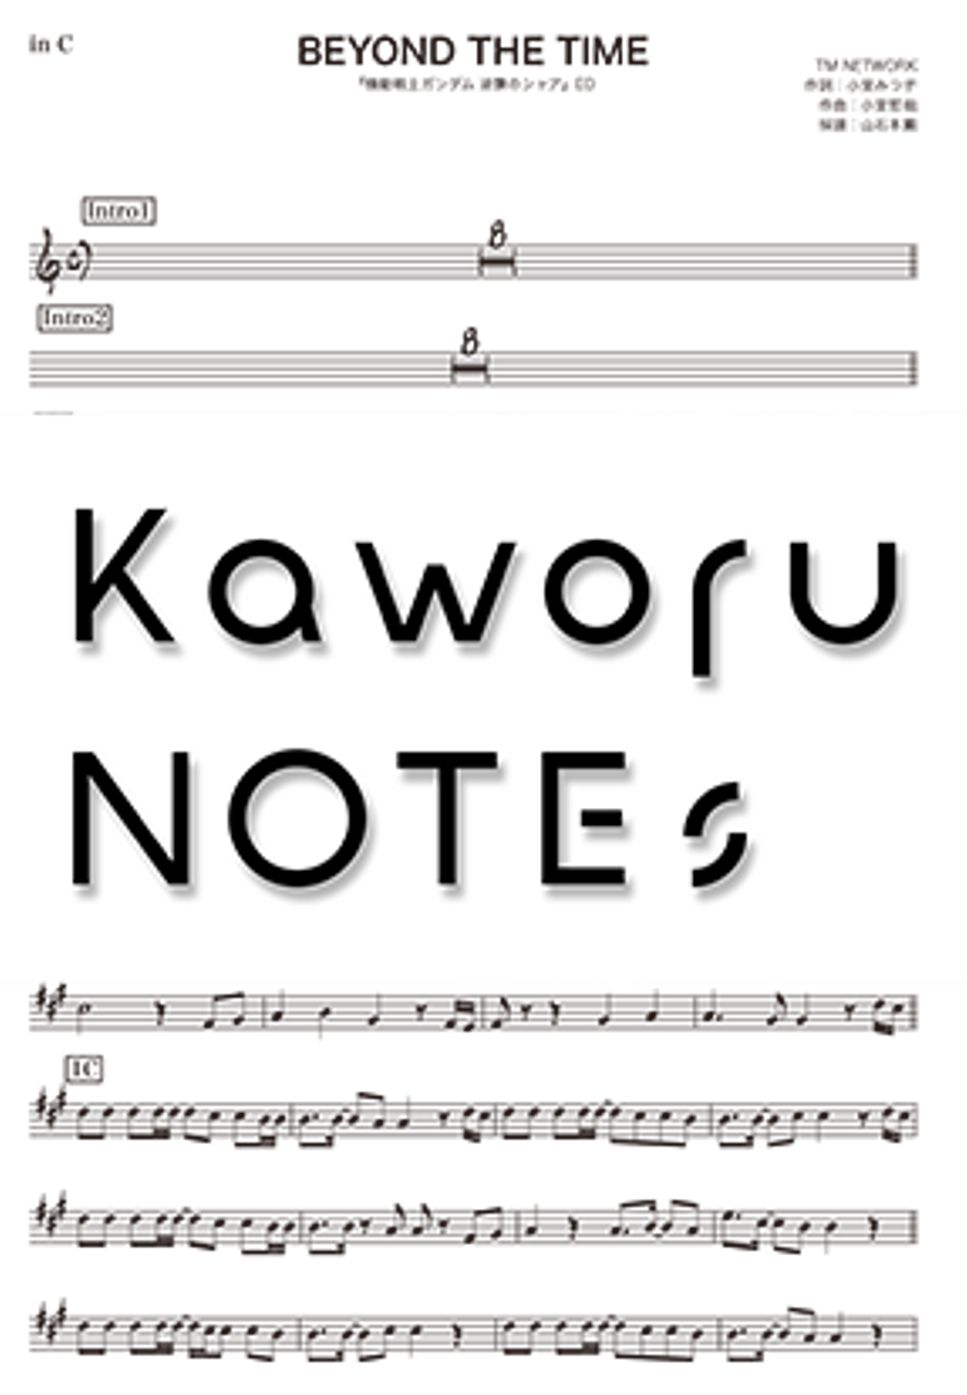 TM NETWORK - BEYOND THE TIME（in F/Mobile Suit Gundam Char's Counterattack） by Kaworu NOTEs